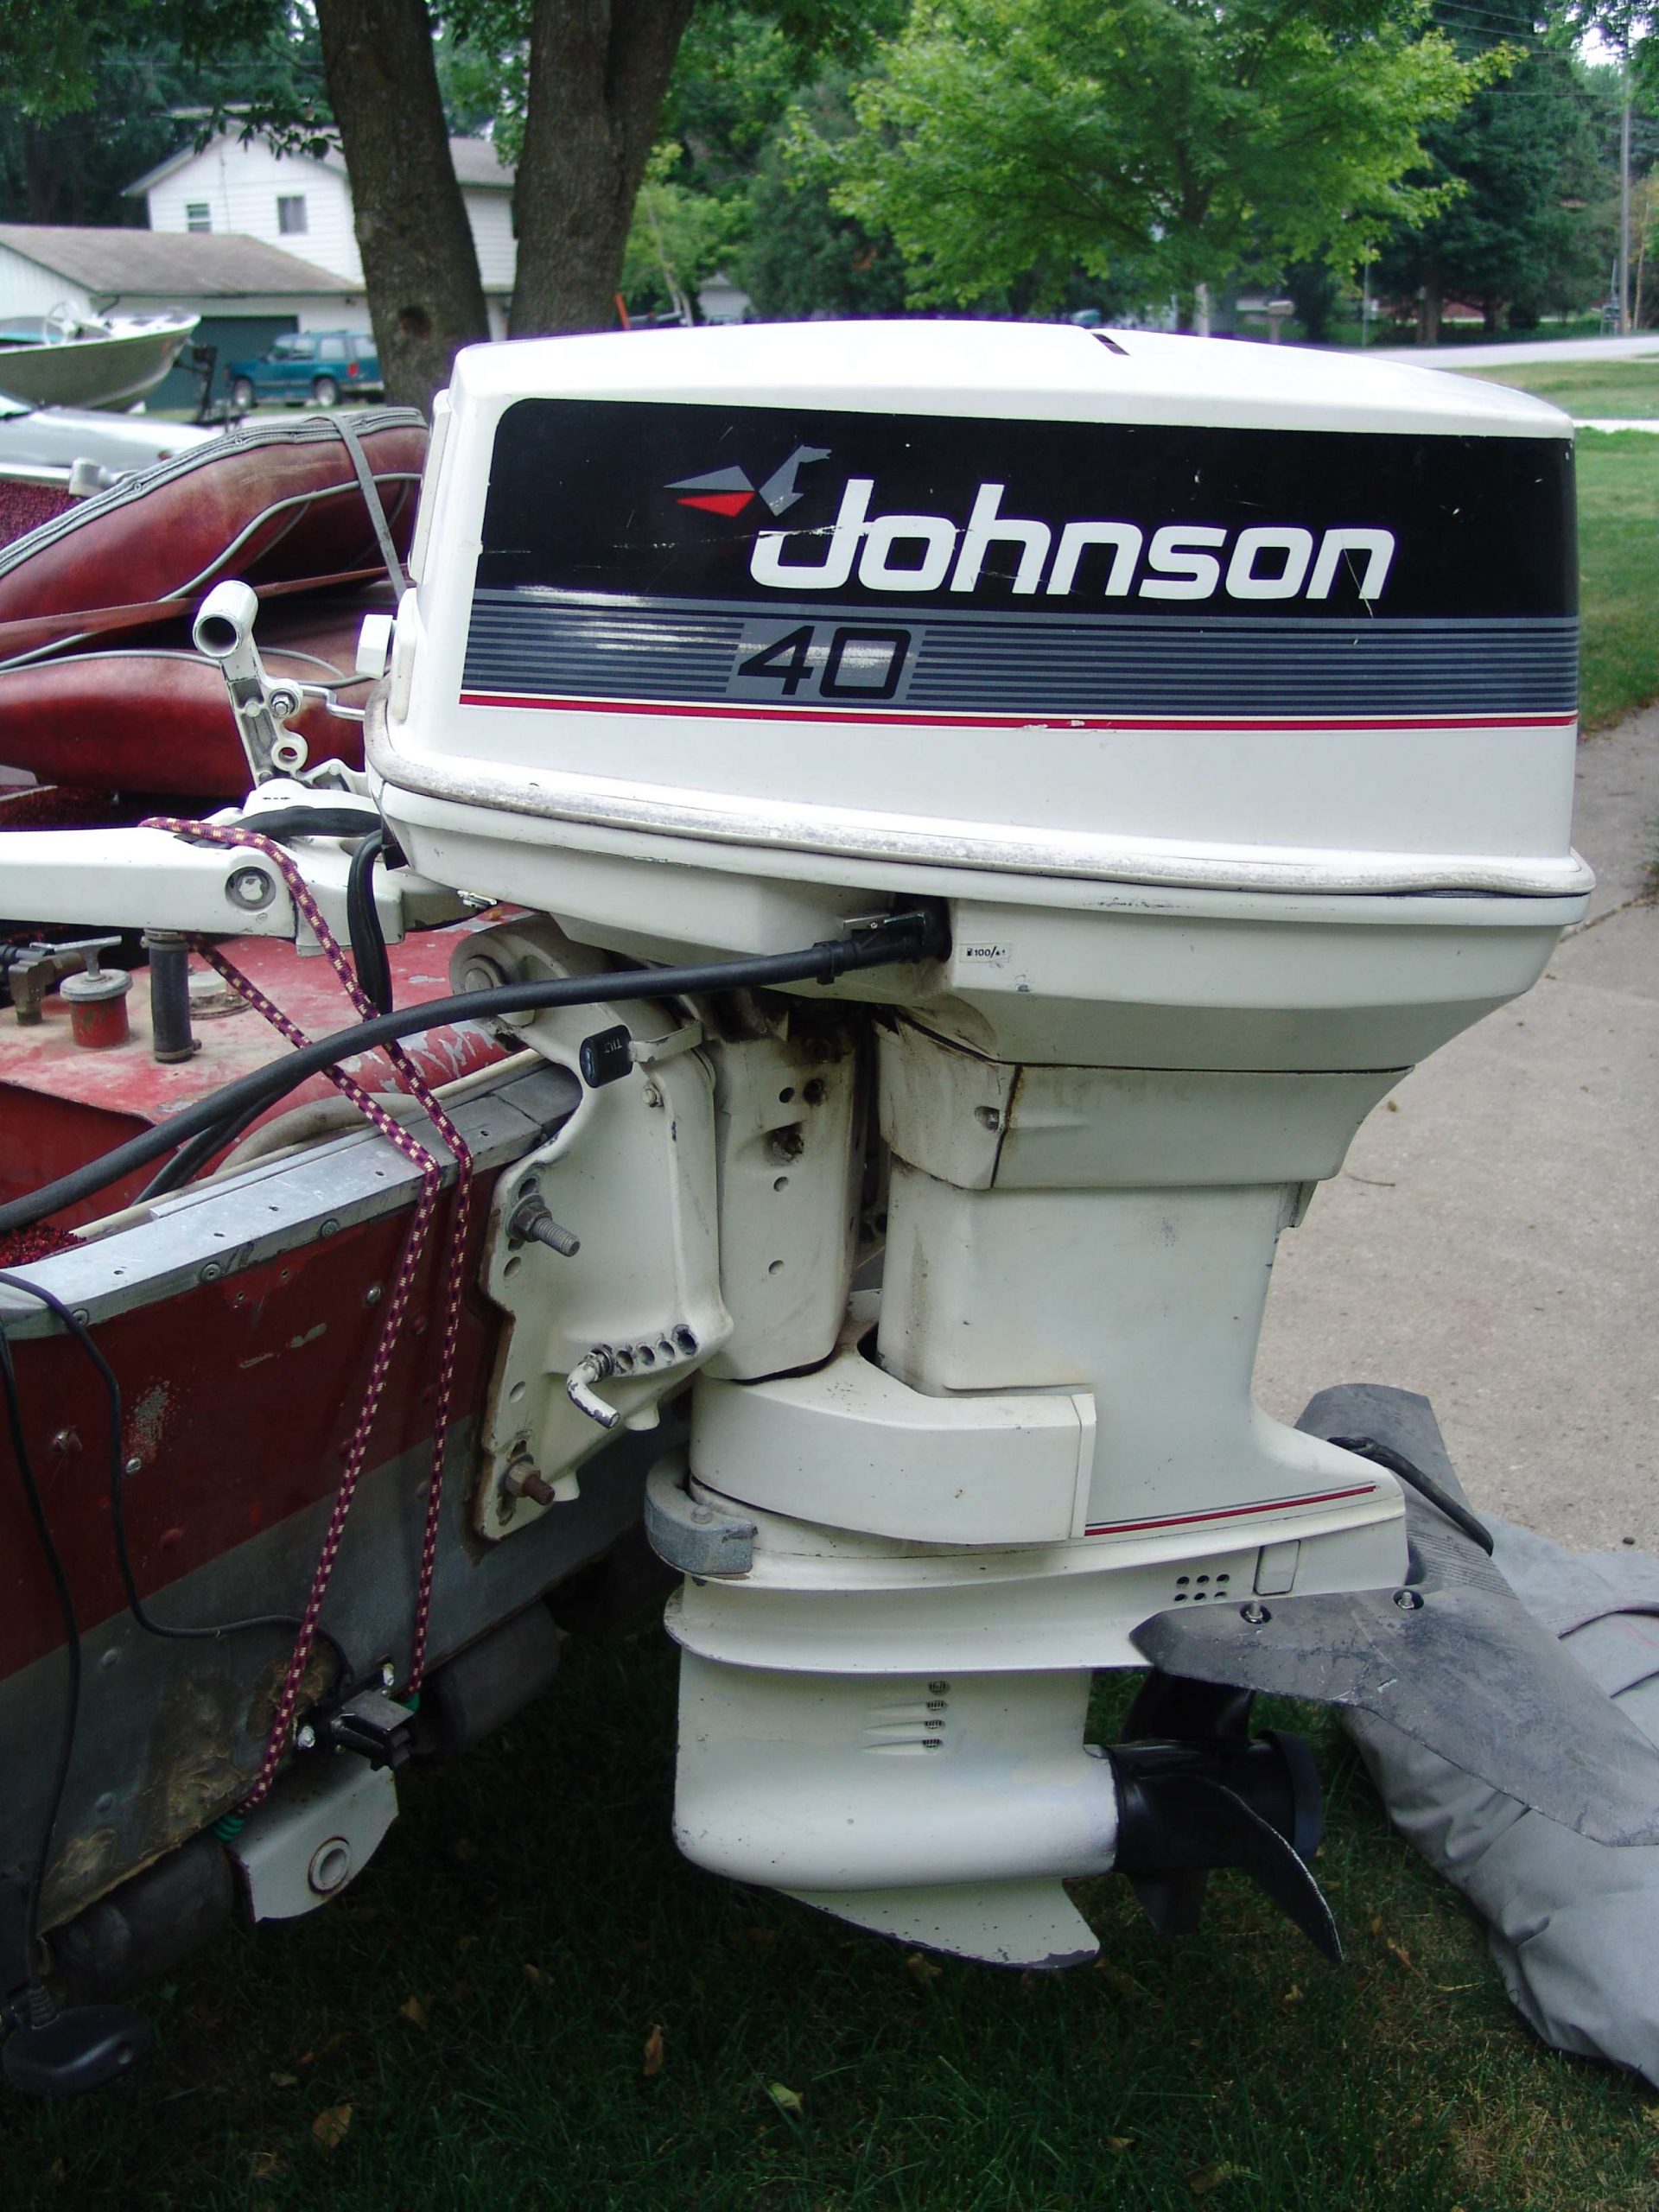 The motor ran like a top. Those old Johnson motors were literally bulletproof. It had an electric, push-button start.